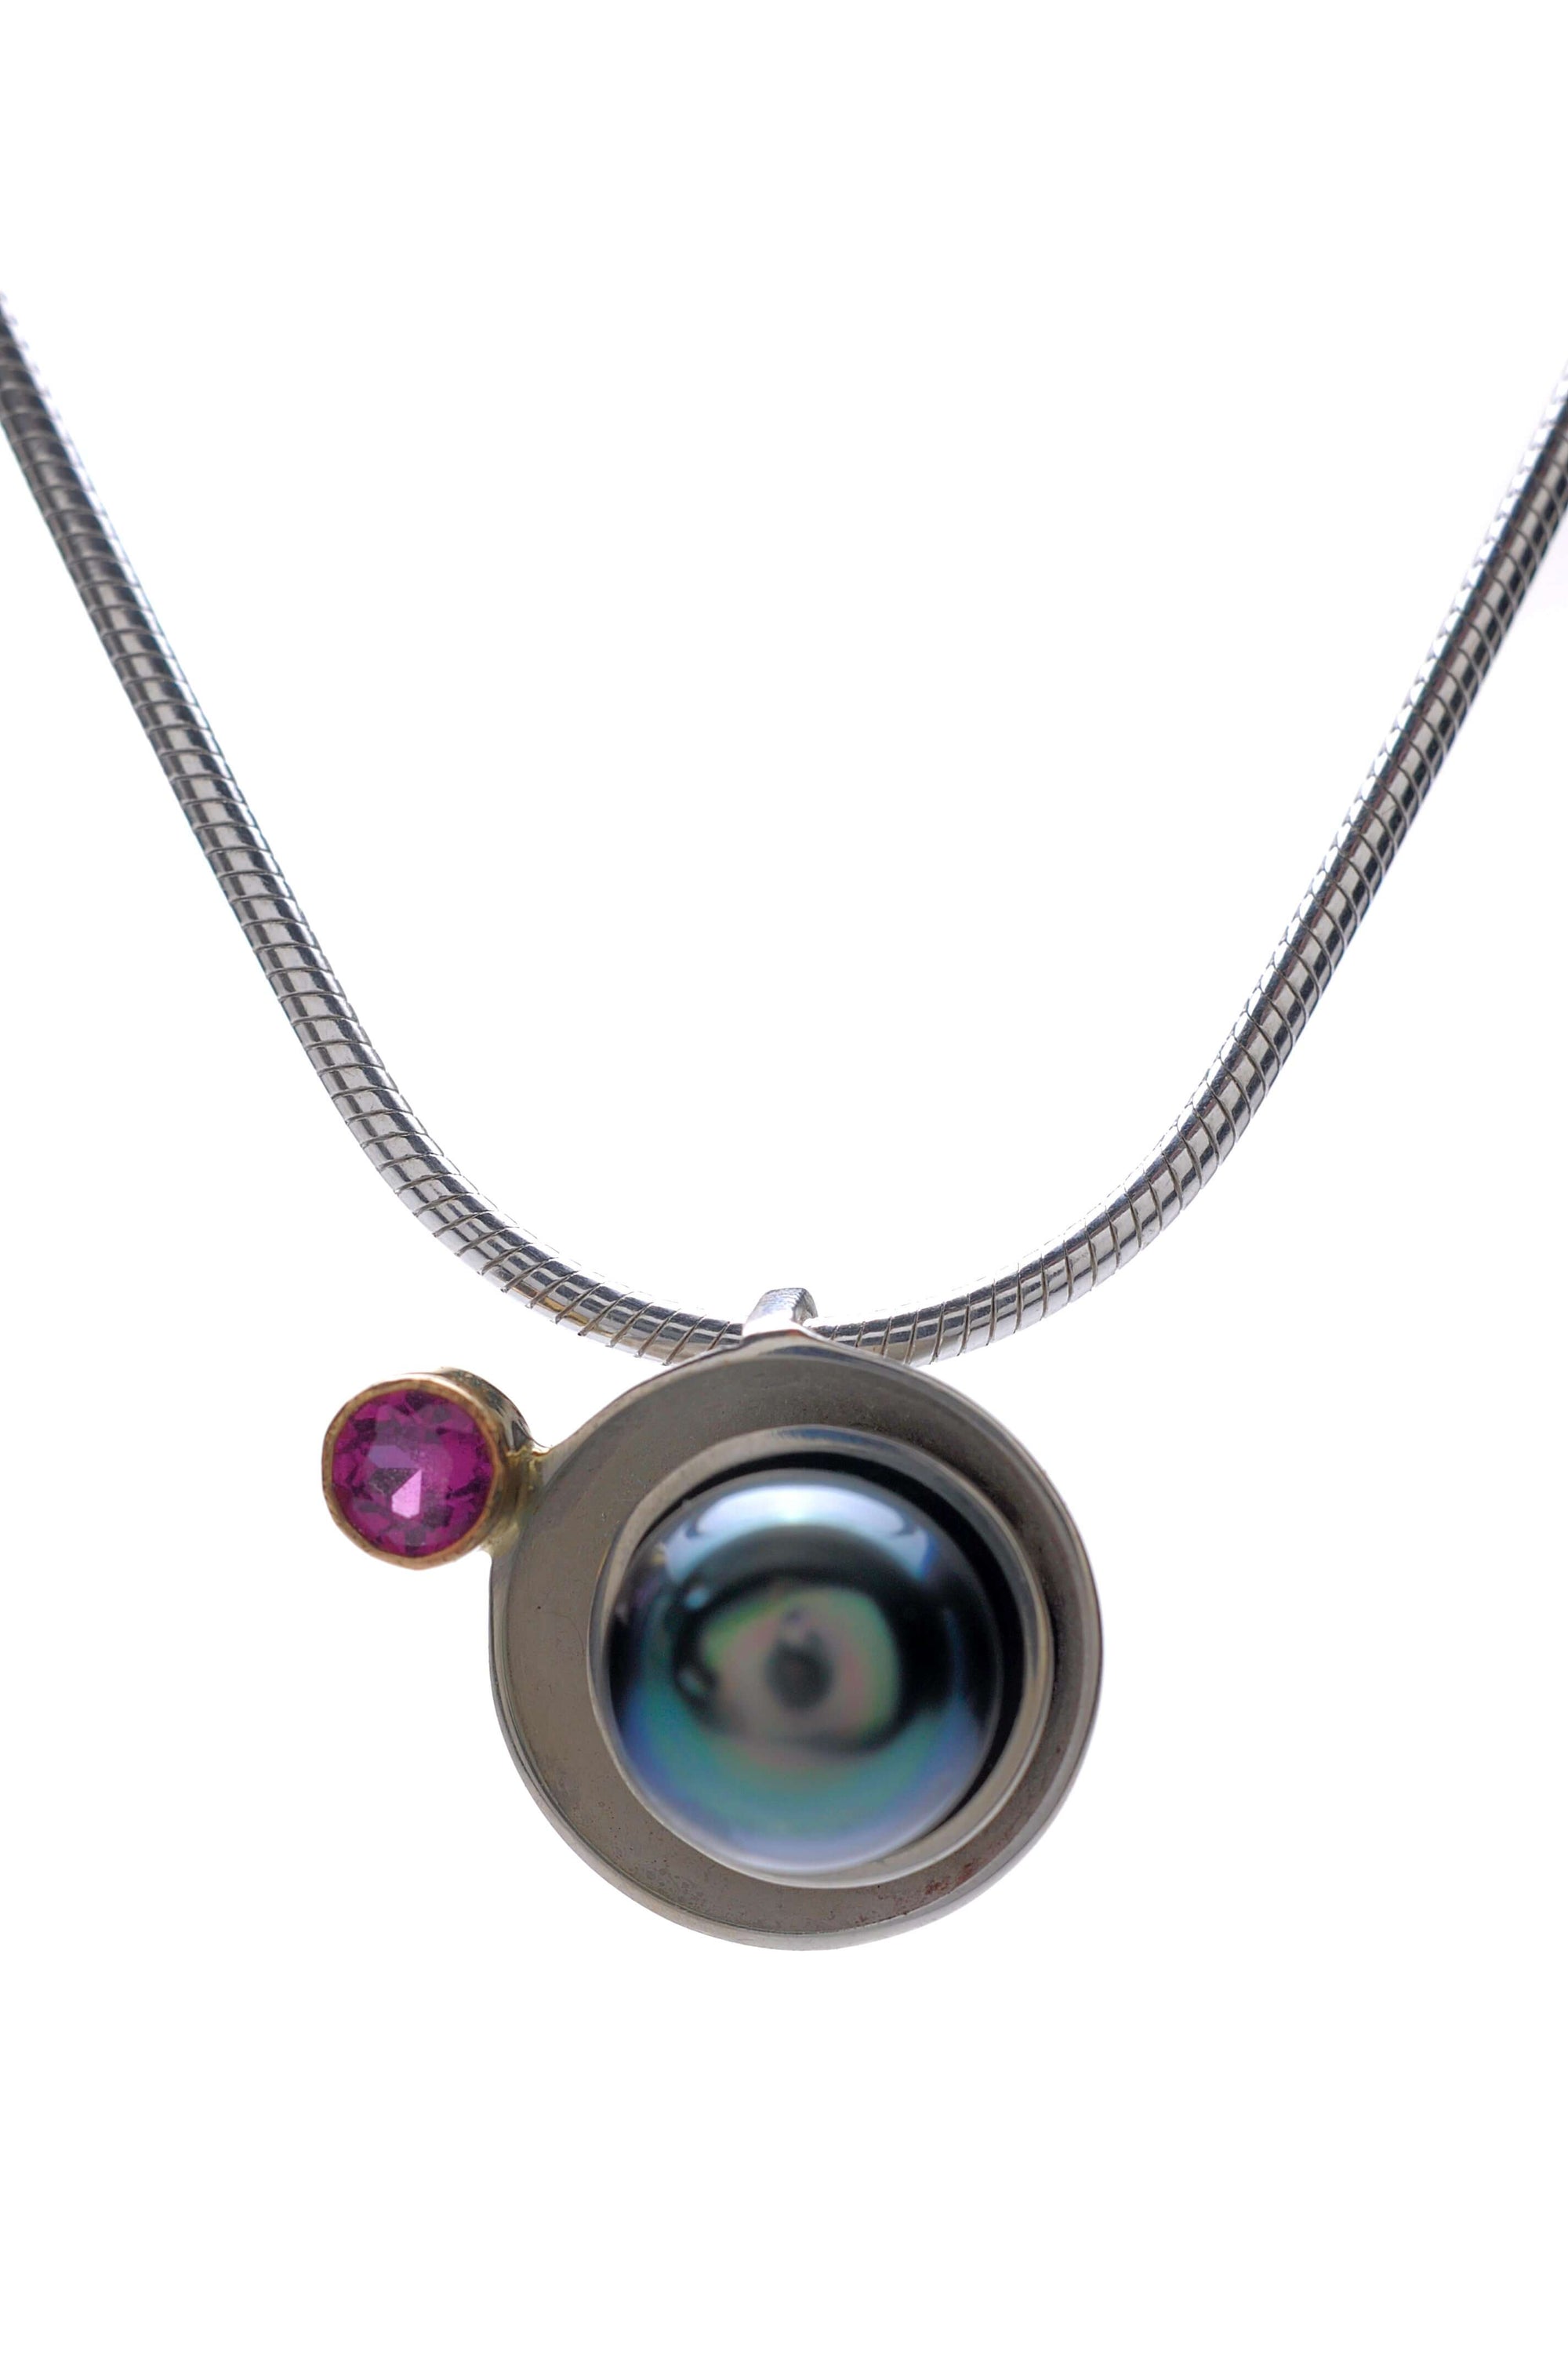 A Tahitian pearl planet pendant with garnet